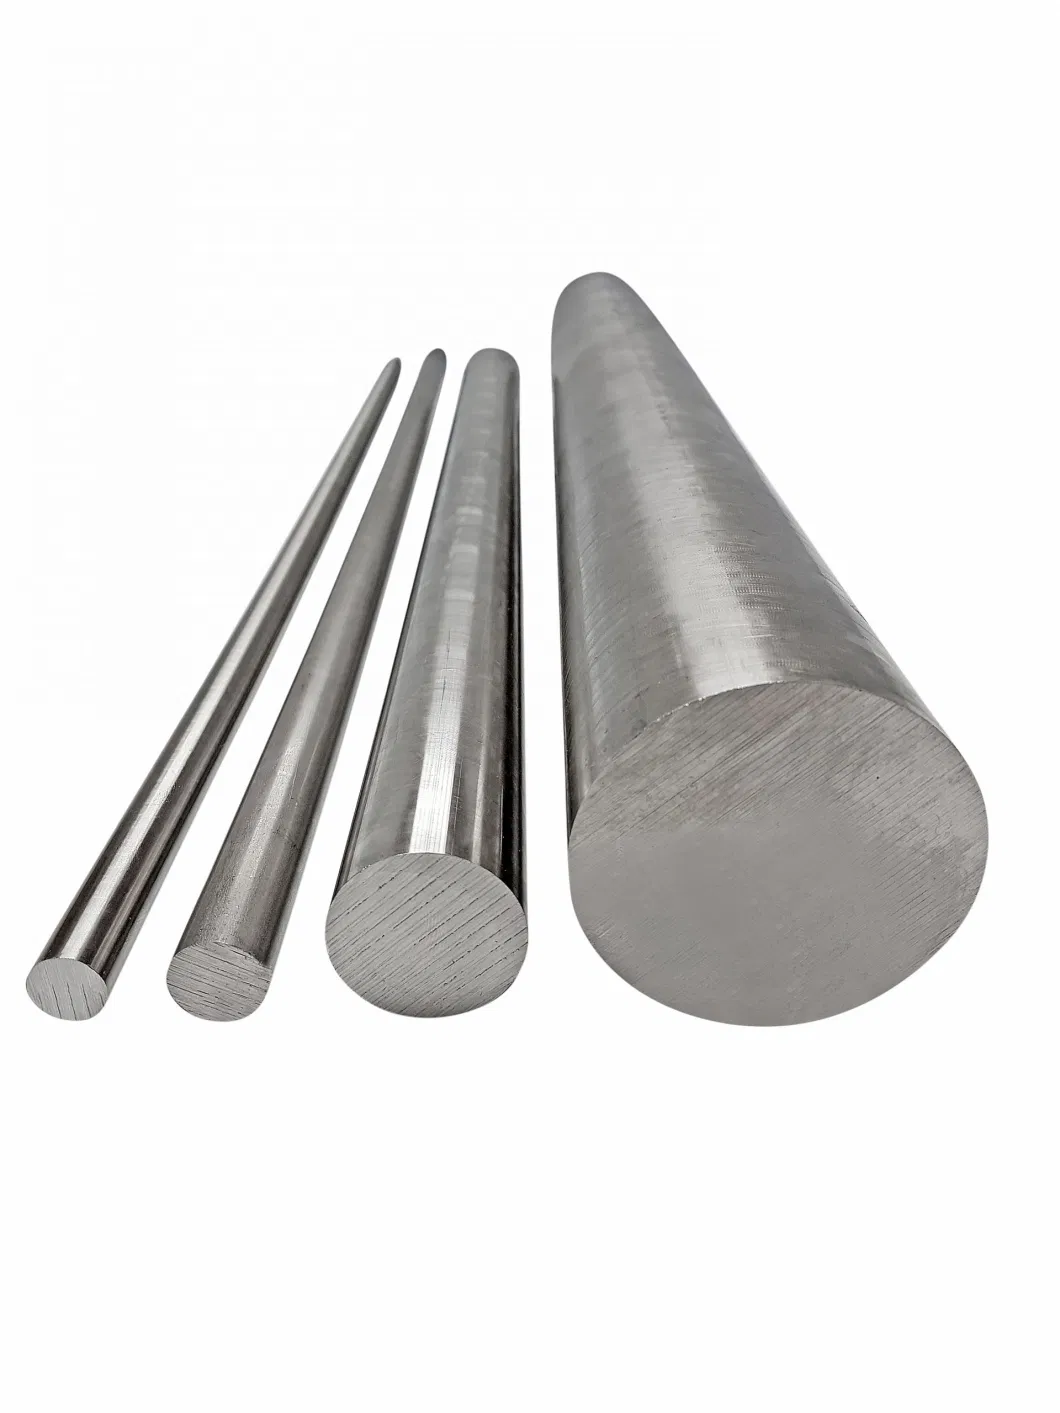 201 304 310 316 321 Stainless Steel Round Bar 4mm 6mm Metal Rod